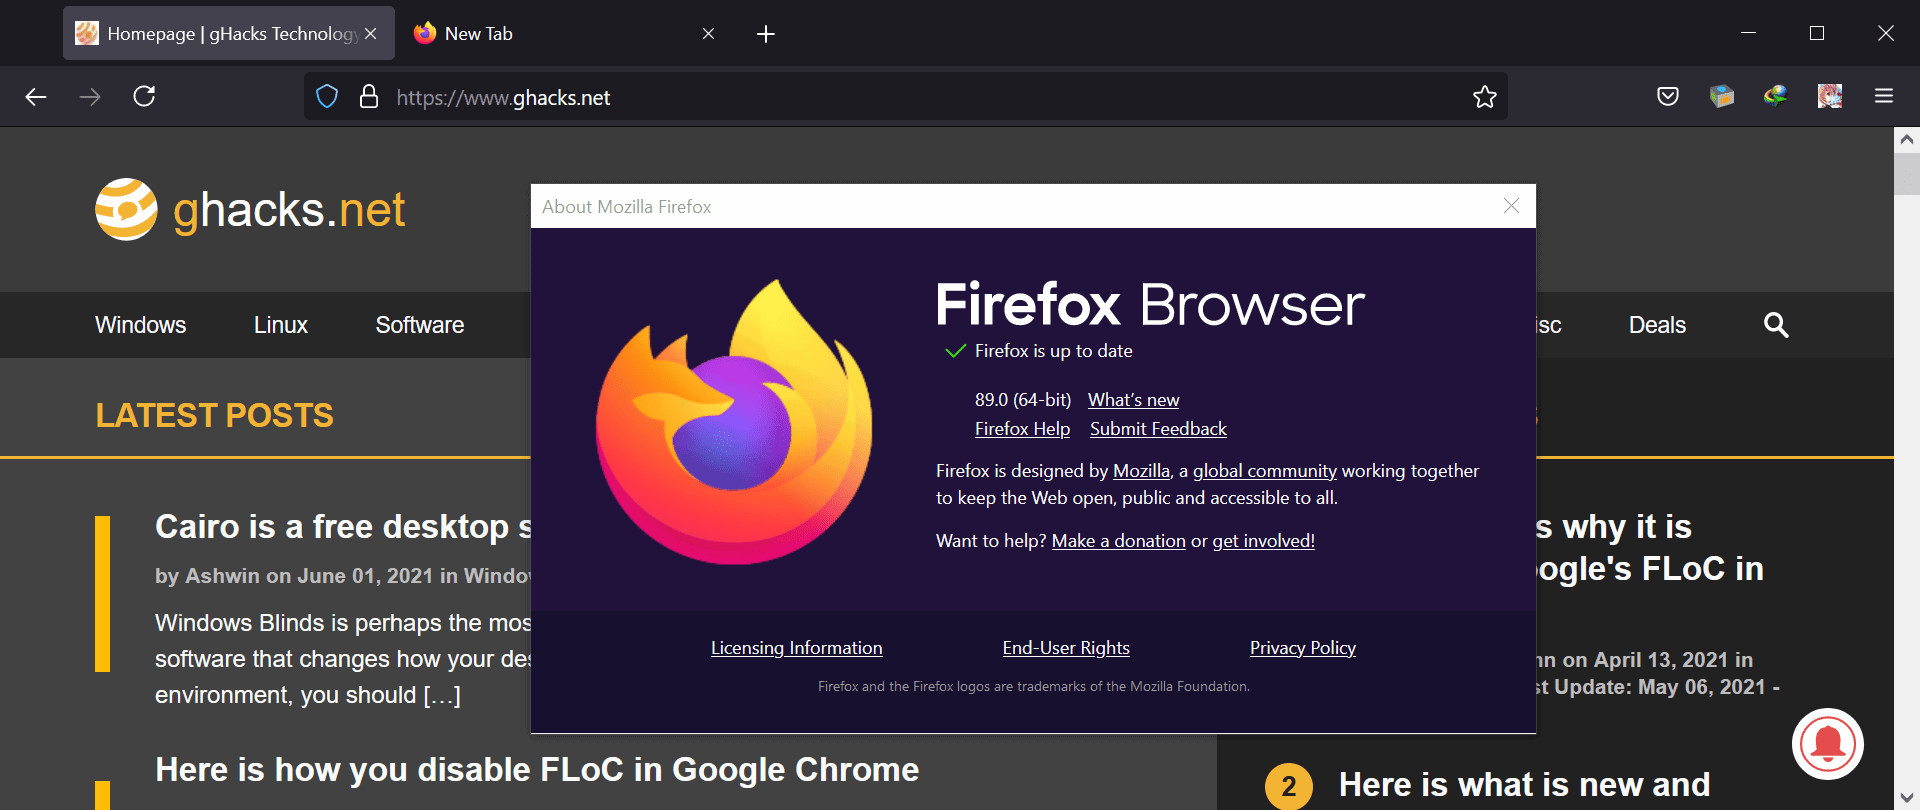 Firefox 89 ships with interface changes